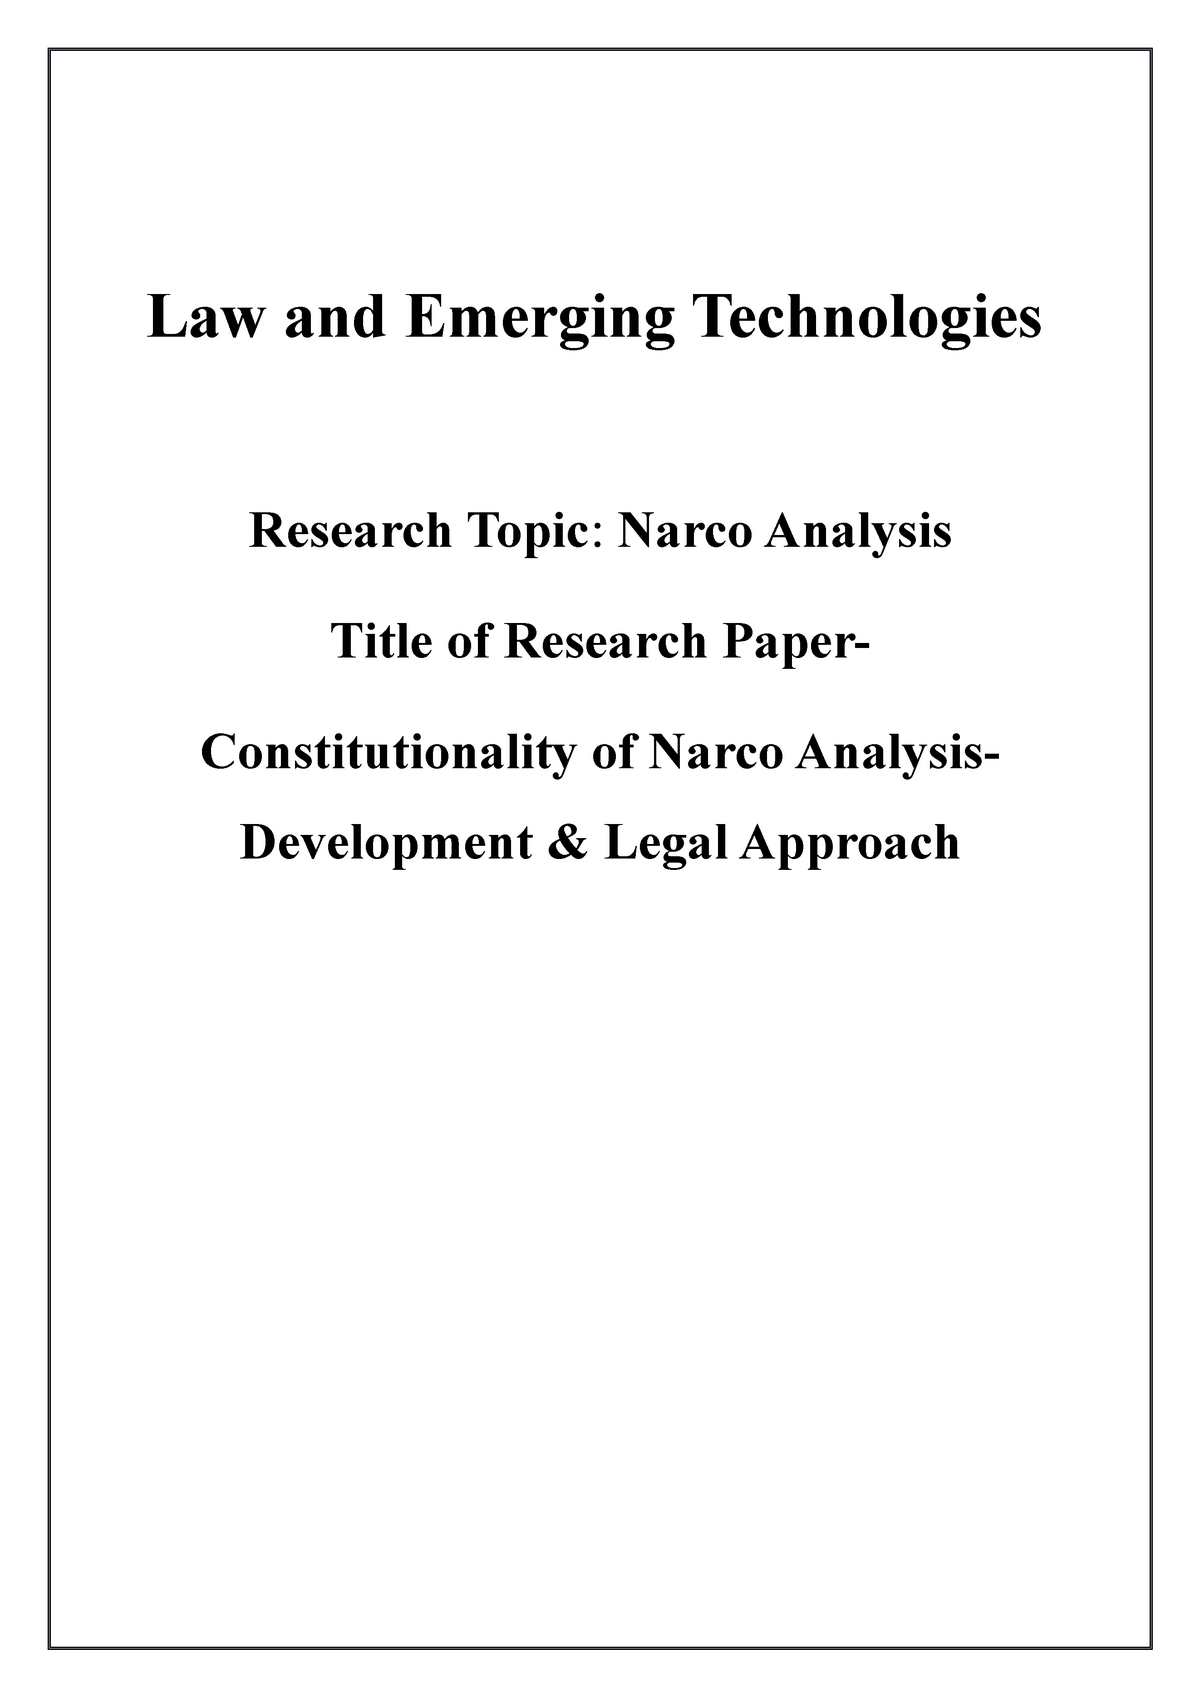 narco analysis research paper